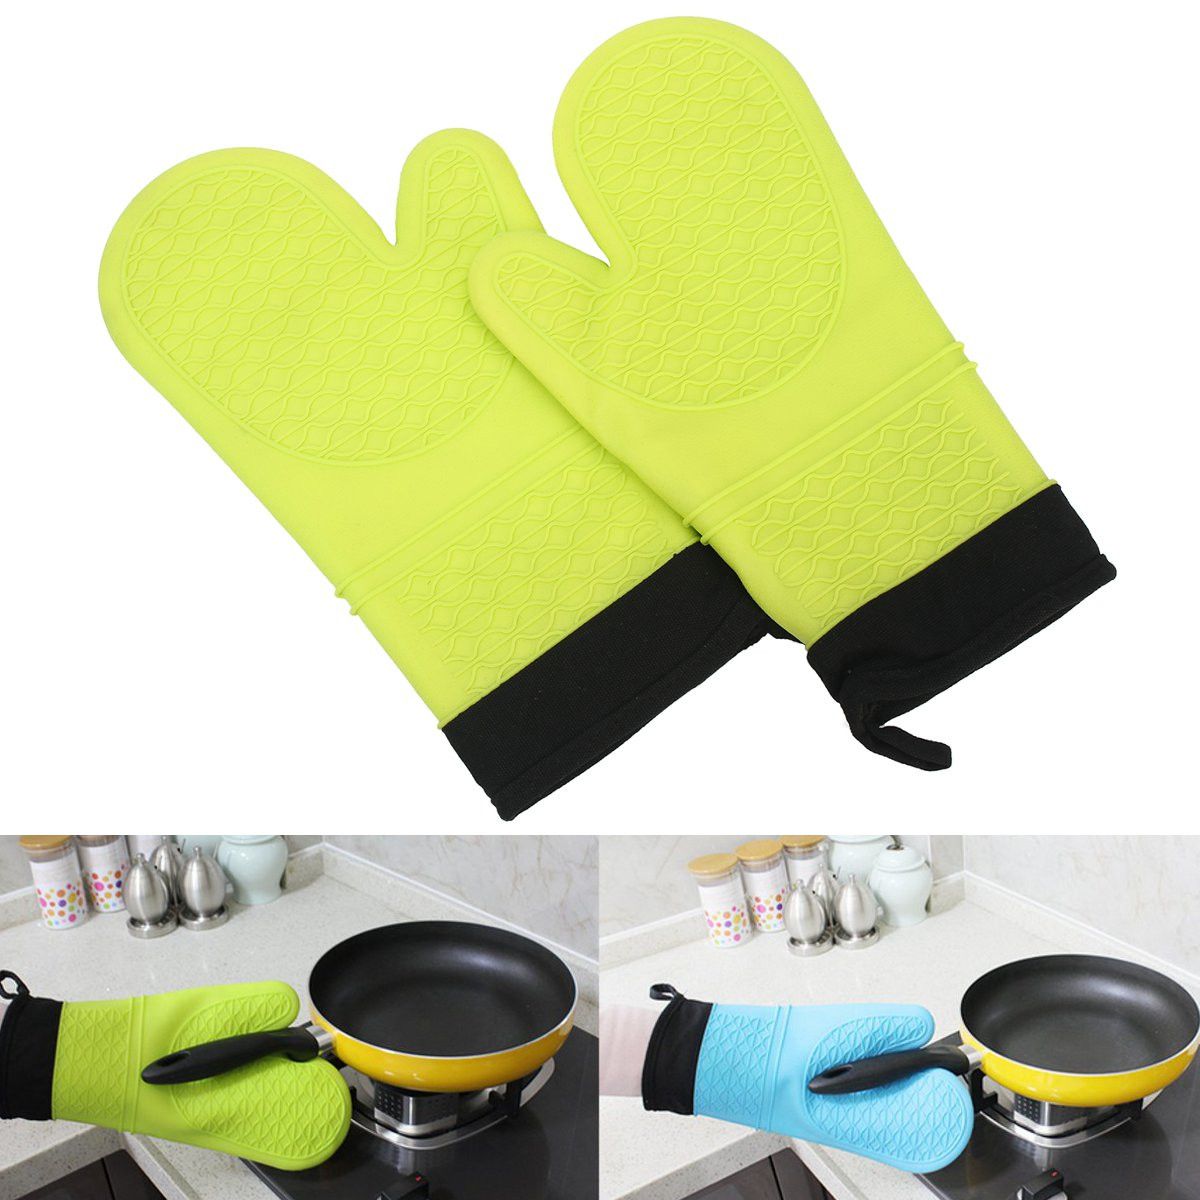 1-Pair-Heat-Resistant-Oven-Glove-Kitchen-BBQ-Cooking-Grilling-Baking-Mitt-Silicone-Fabric-Glove-1151604